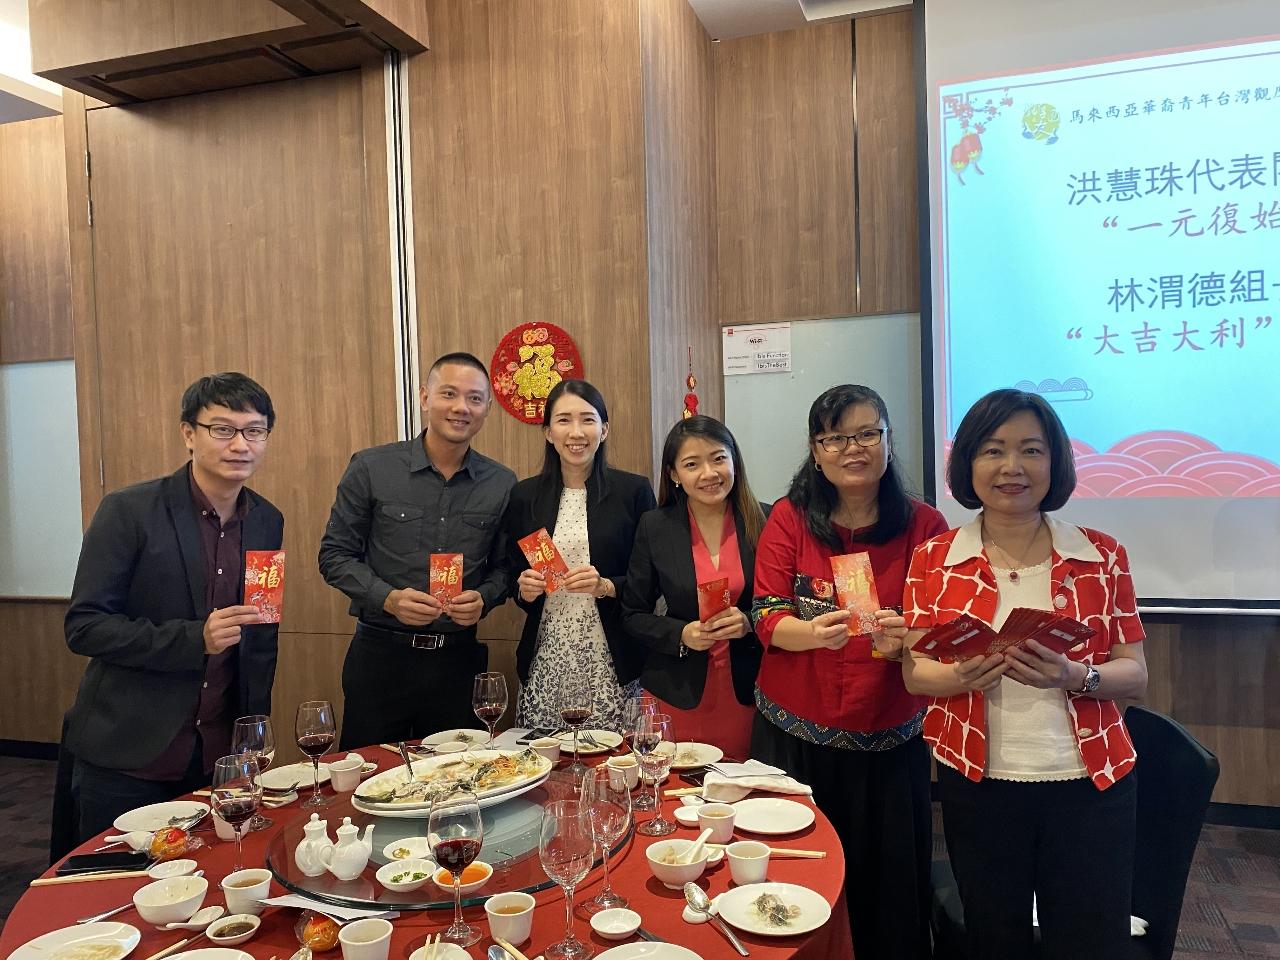 Representative Anne Hung (first from right) send Chinese New Year red envelope to attendees.